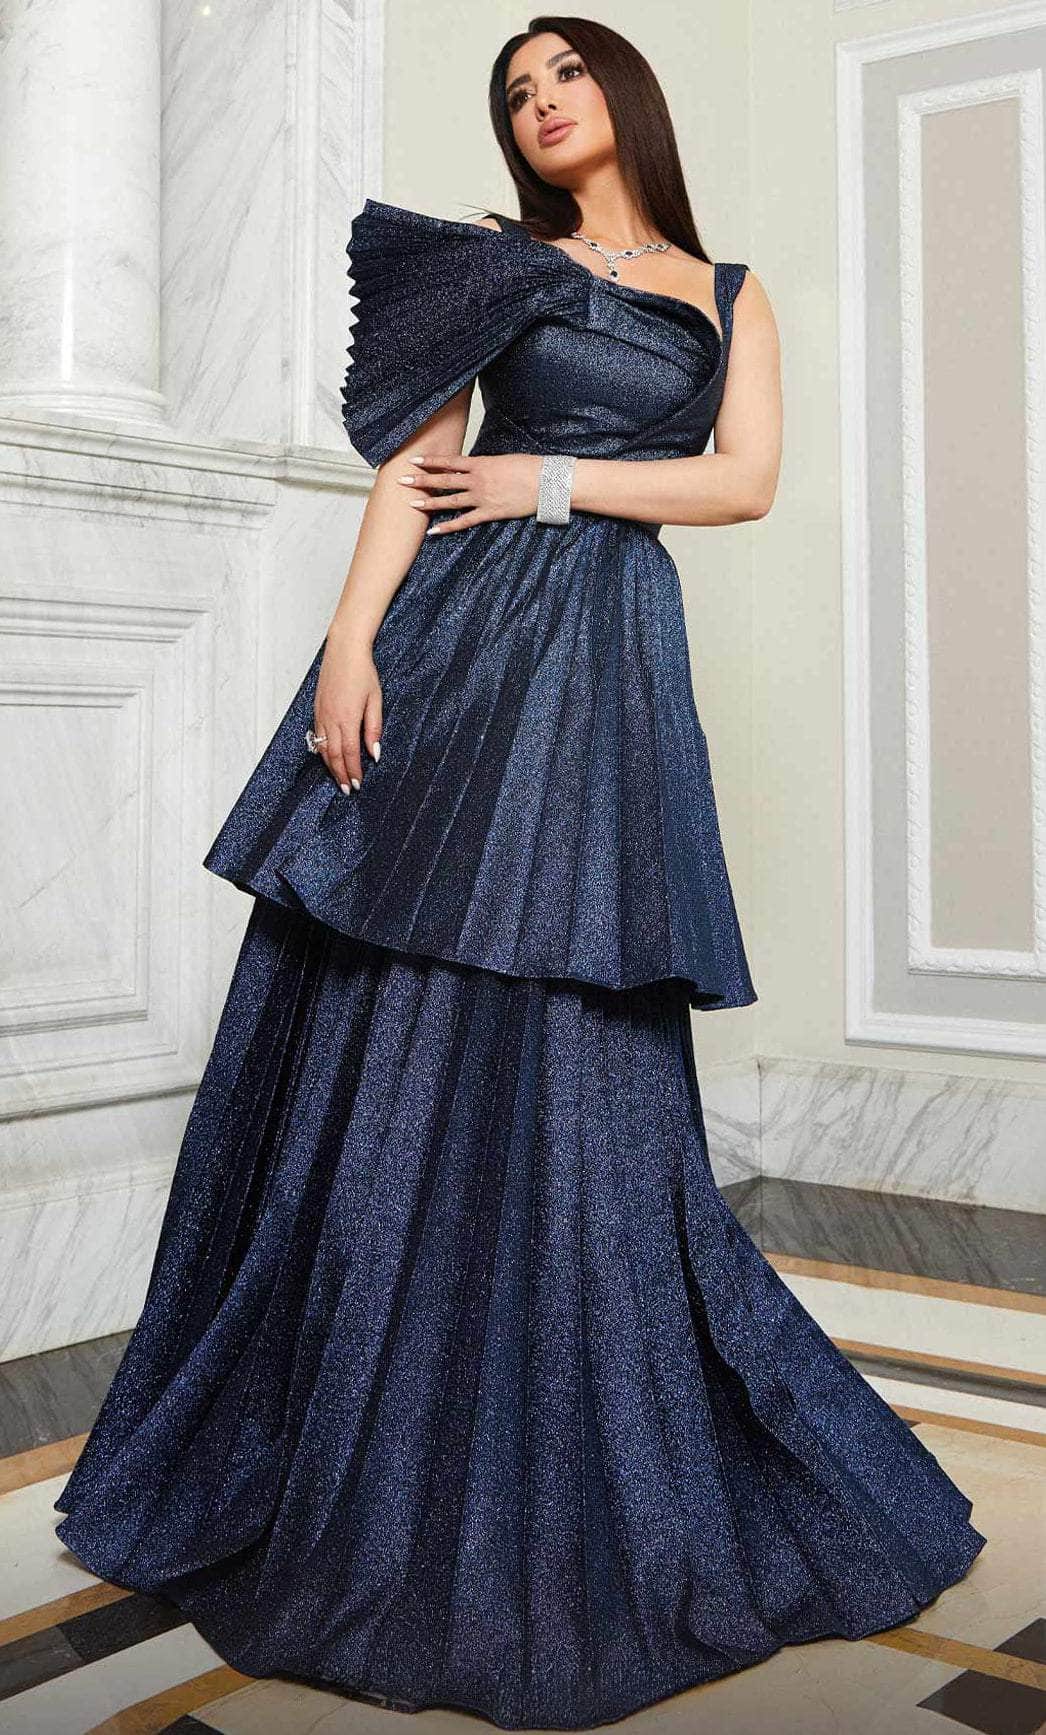 MNM Couture E0017 - Asymmetric Metallic Pleated Evening Gown Prom Dresses 4 / Navy Blue